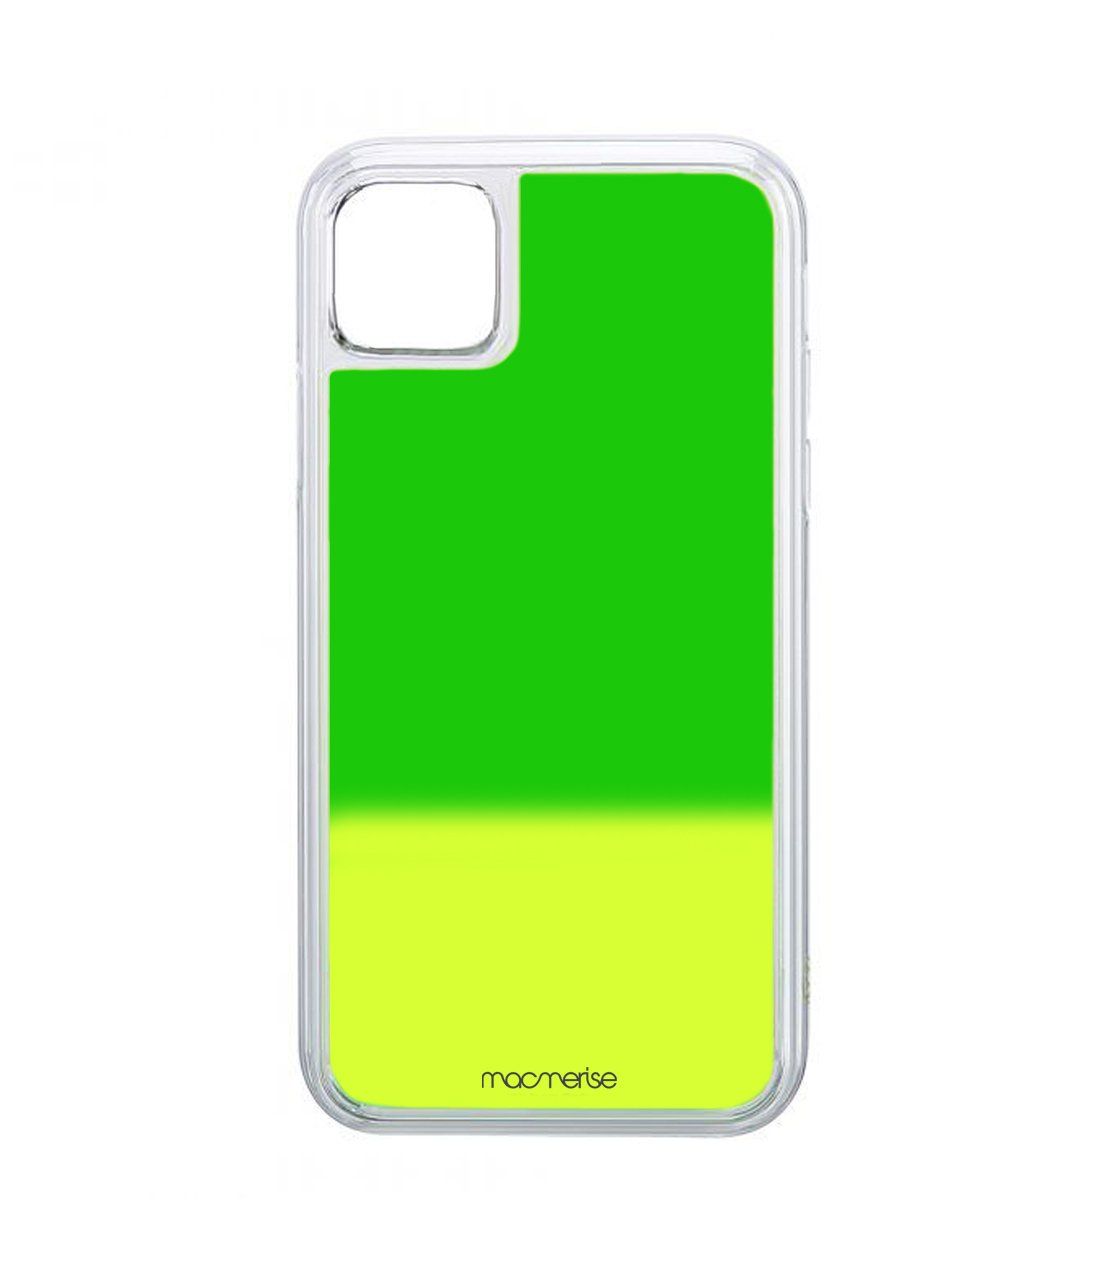 Neon Sand Green - Neon Sand Phone Case for iPhone 11 Pro Max